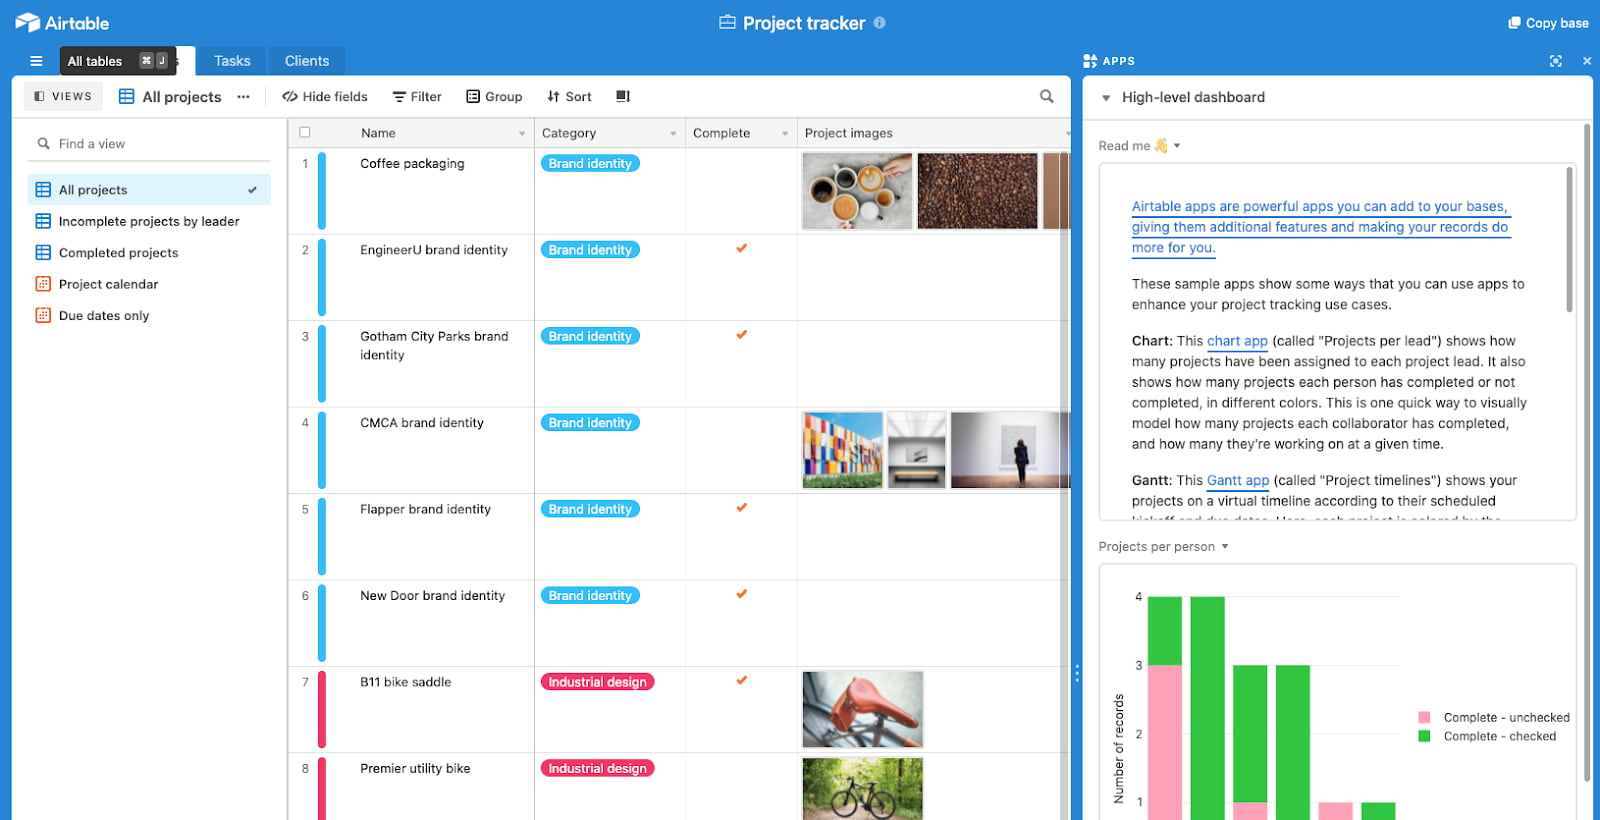 airtable project tracker template.jpeg?width=1600&name=airtable project tracker template - 16 Free Project Management Software Options to Keep Your Team On Track